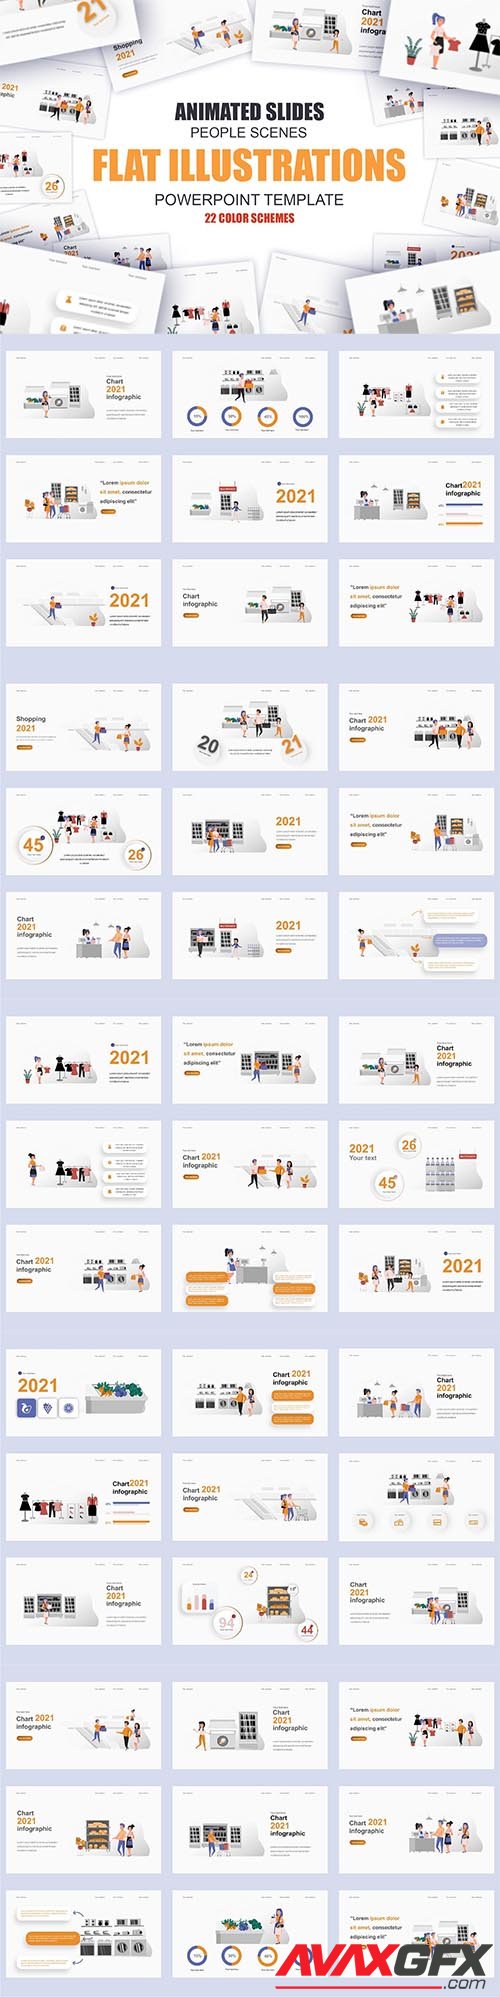 Shopping Illustration Powerpoint Template